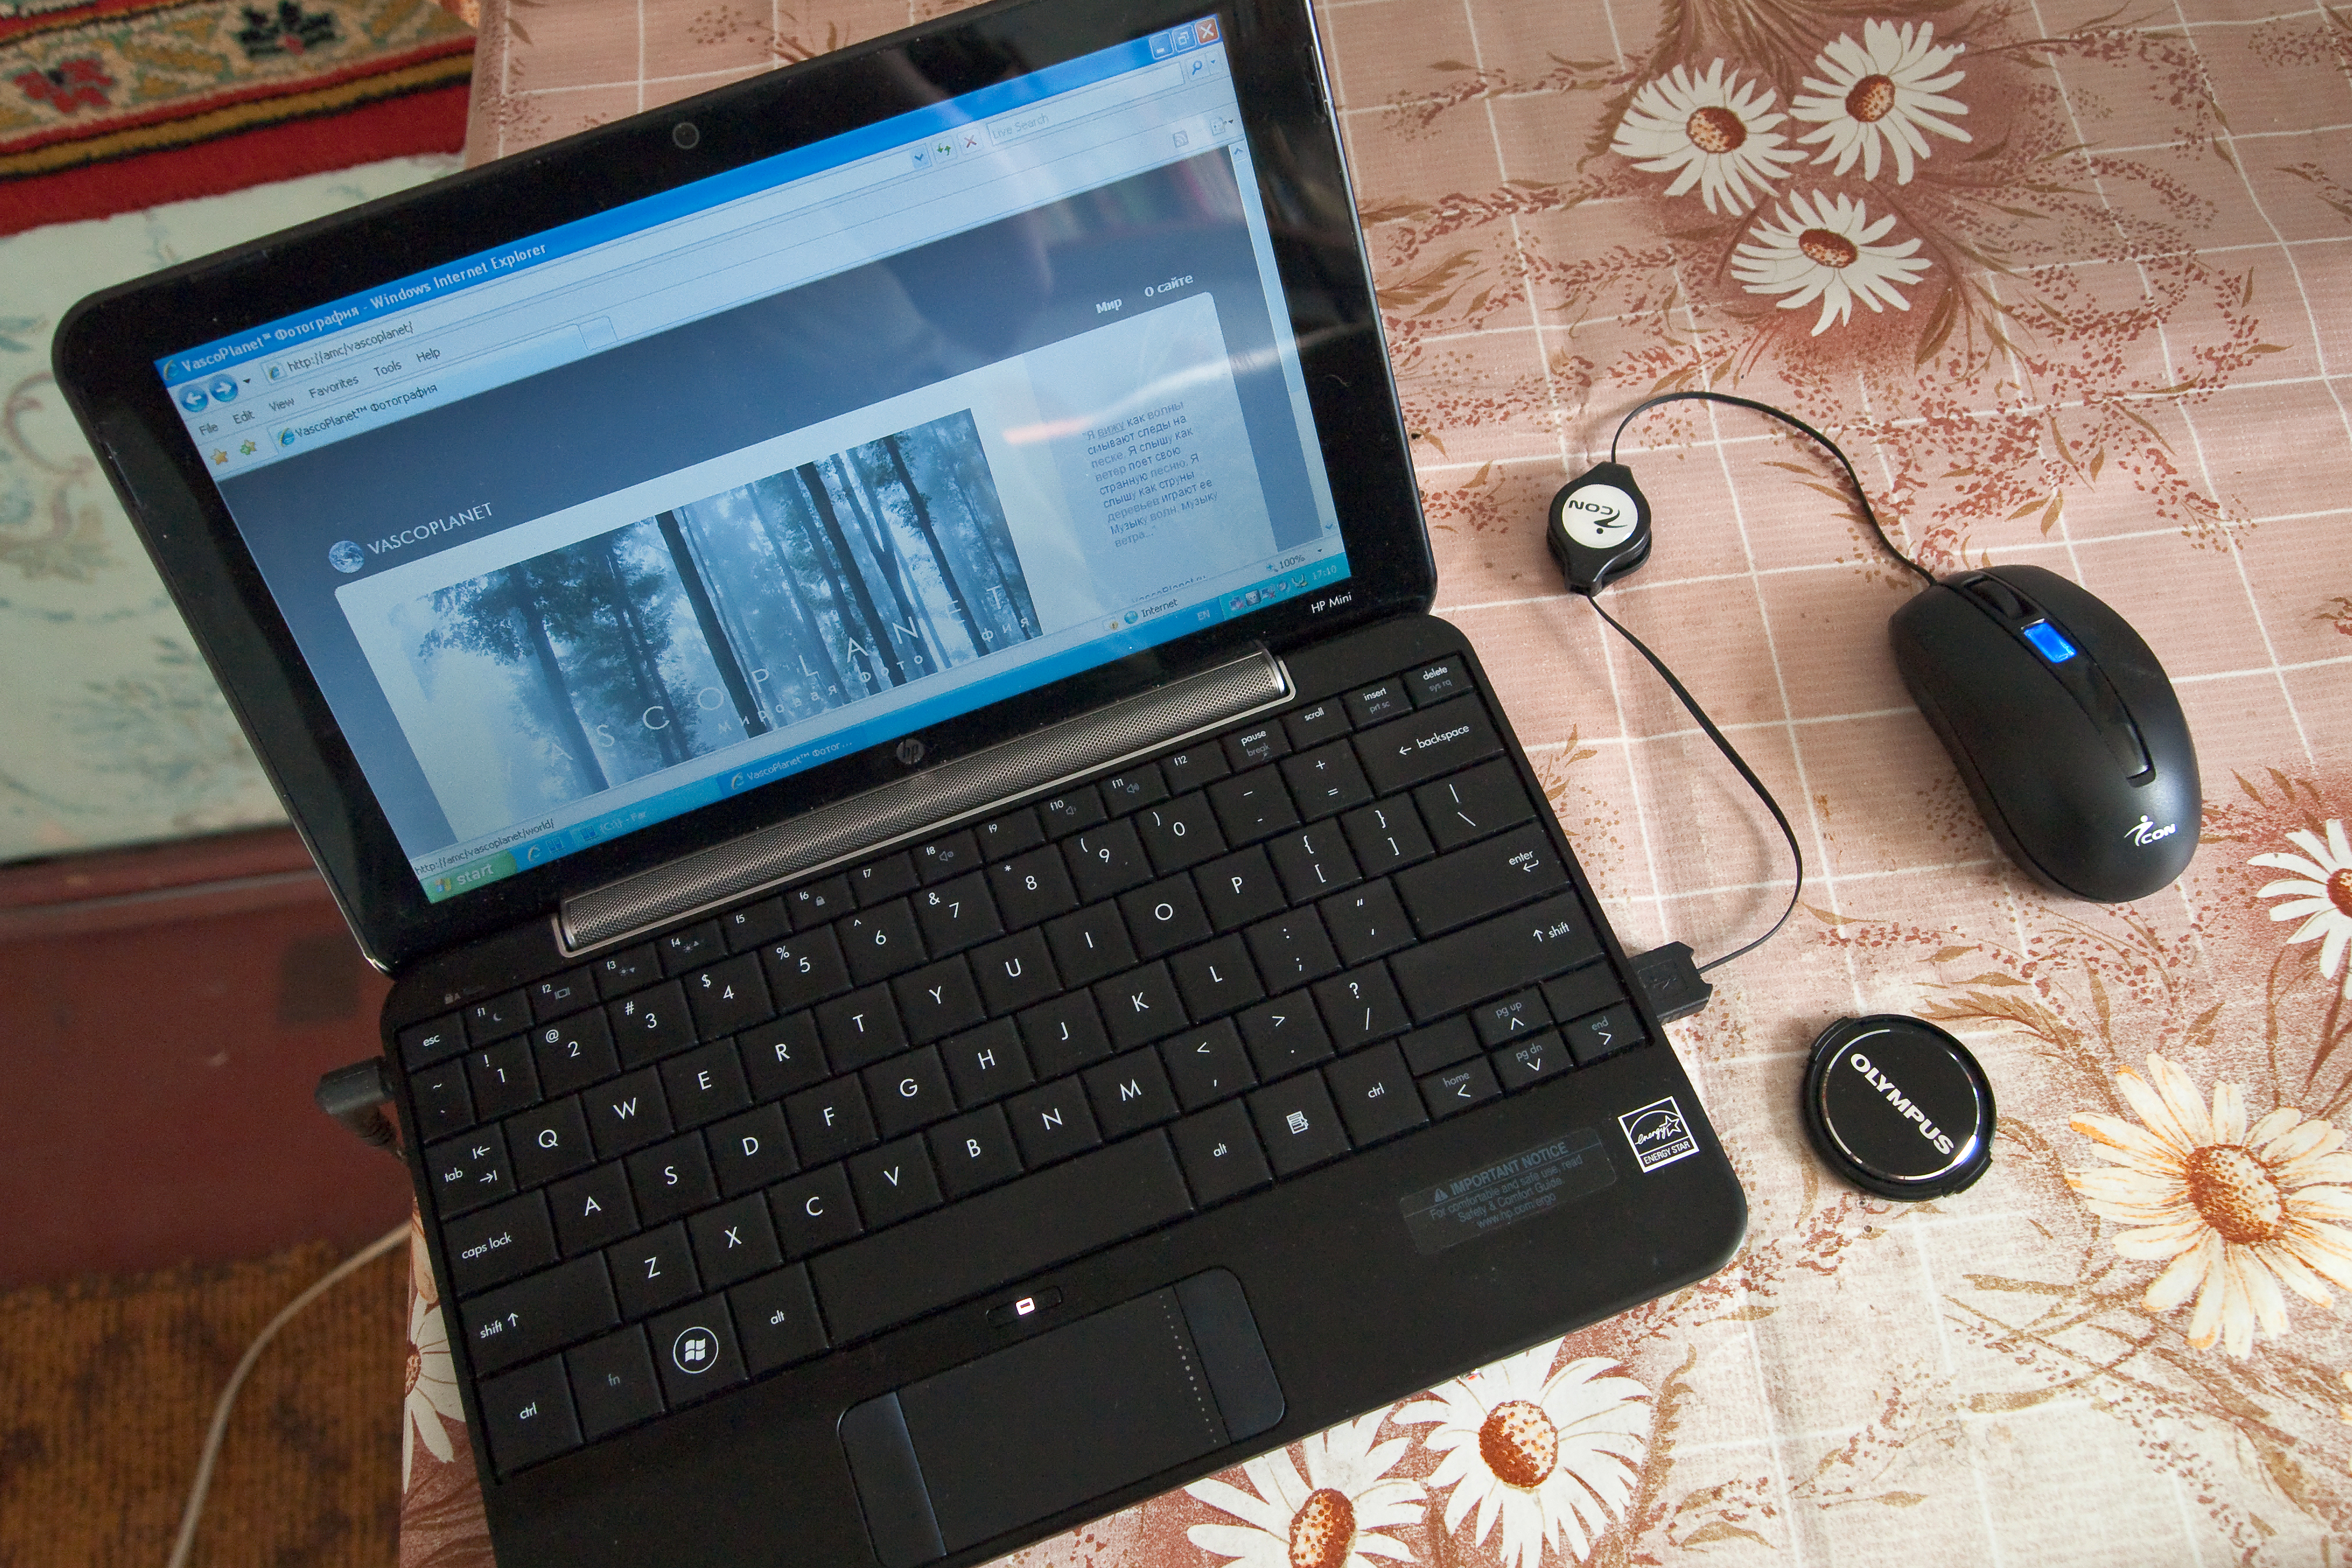 File:Laptop, Small notebook, Netbook, Rostov-on-Don, Russia.jpg